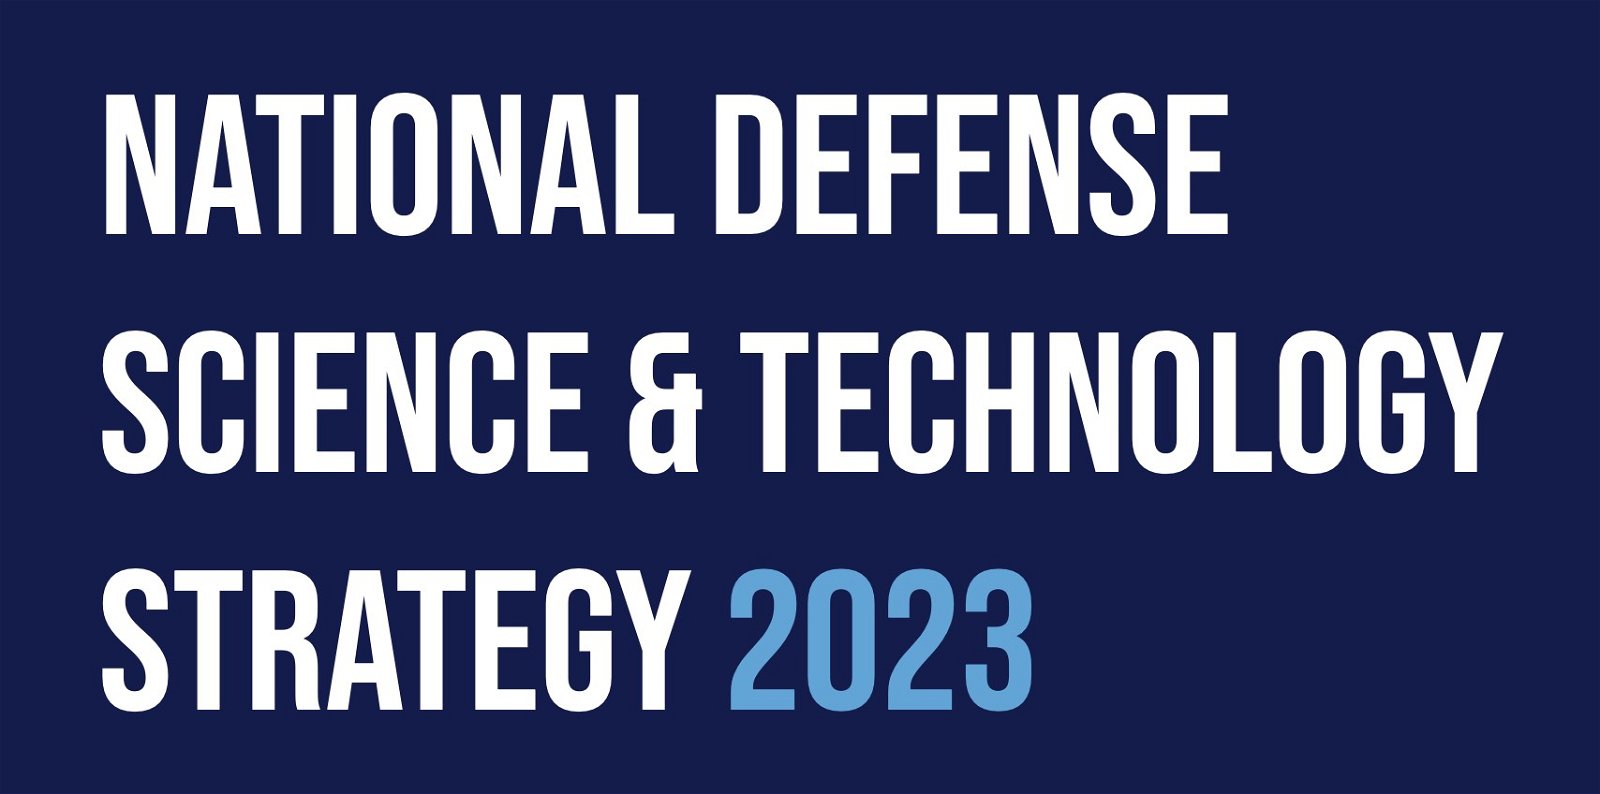 National Defense Science